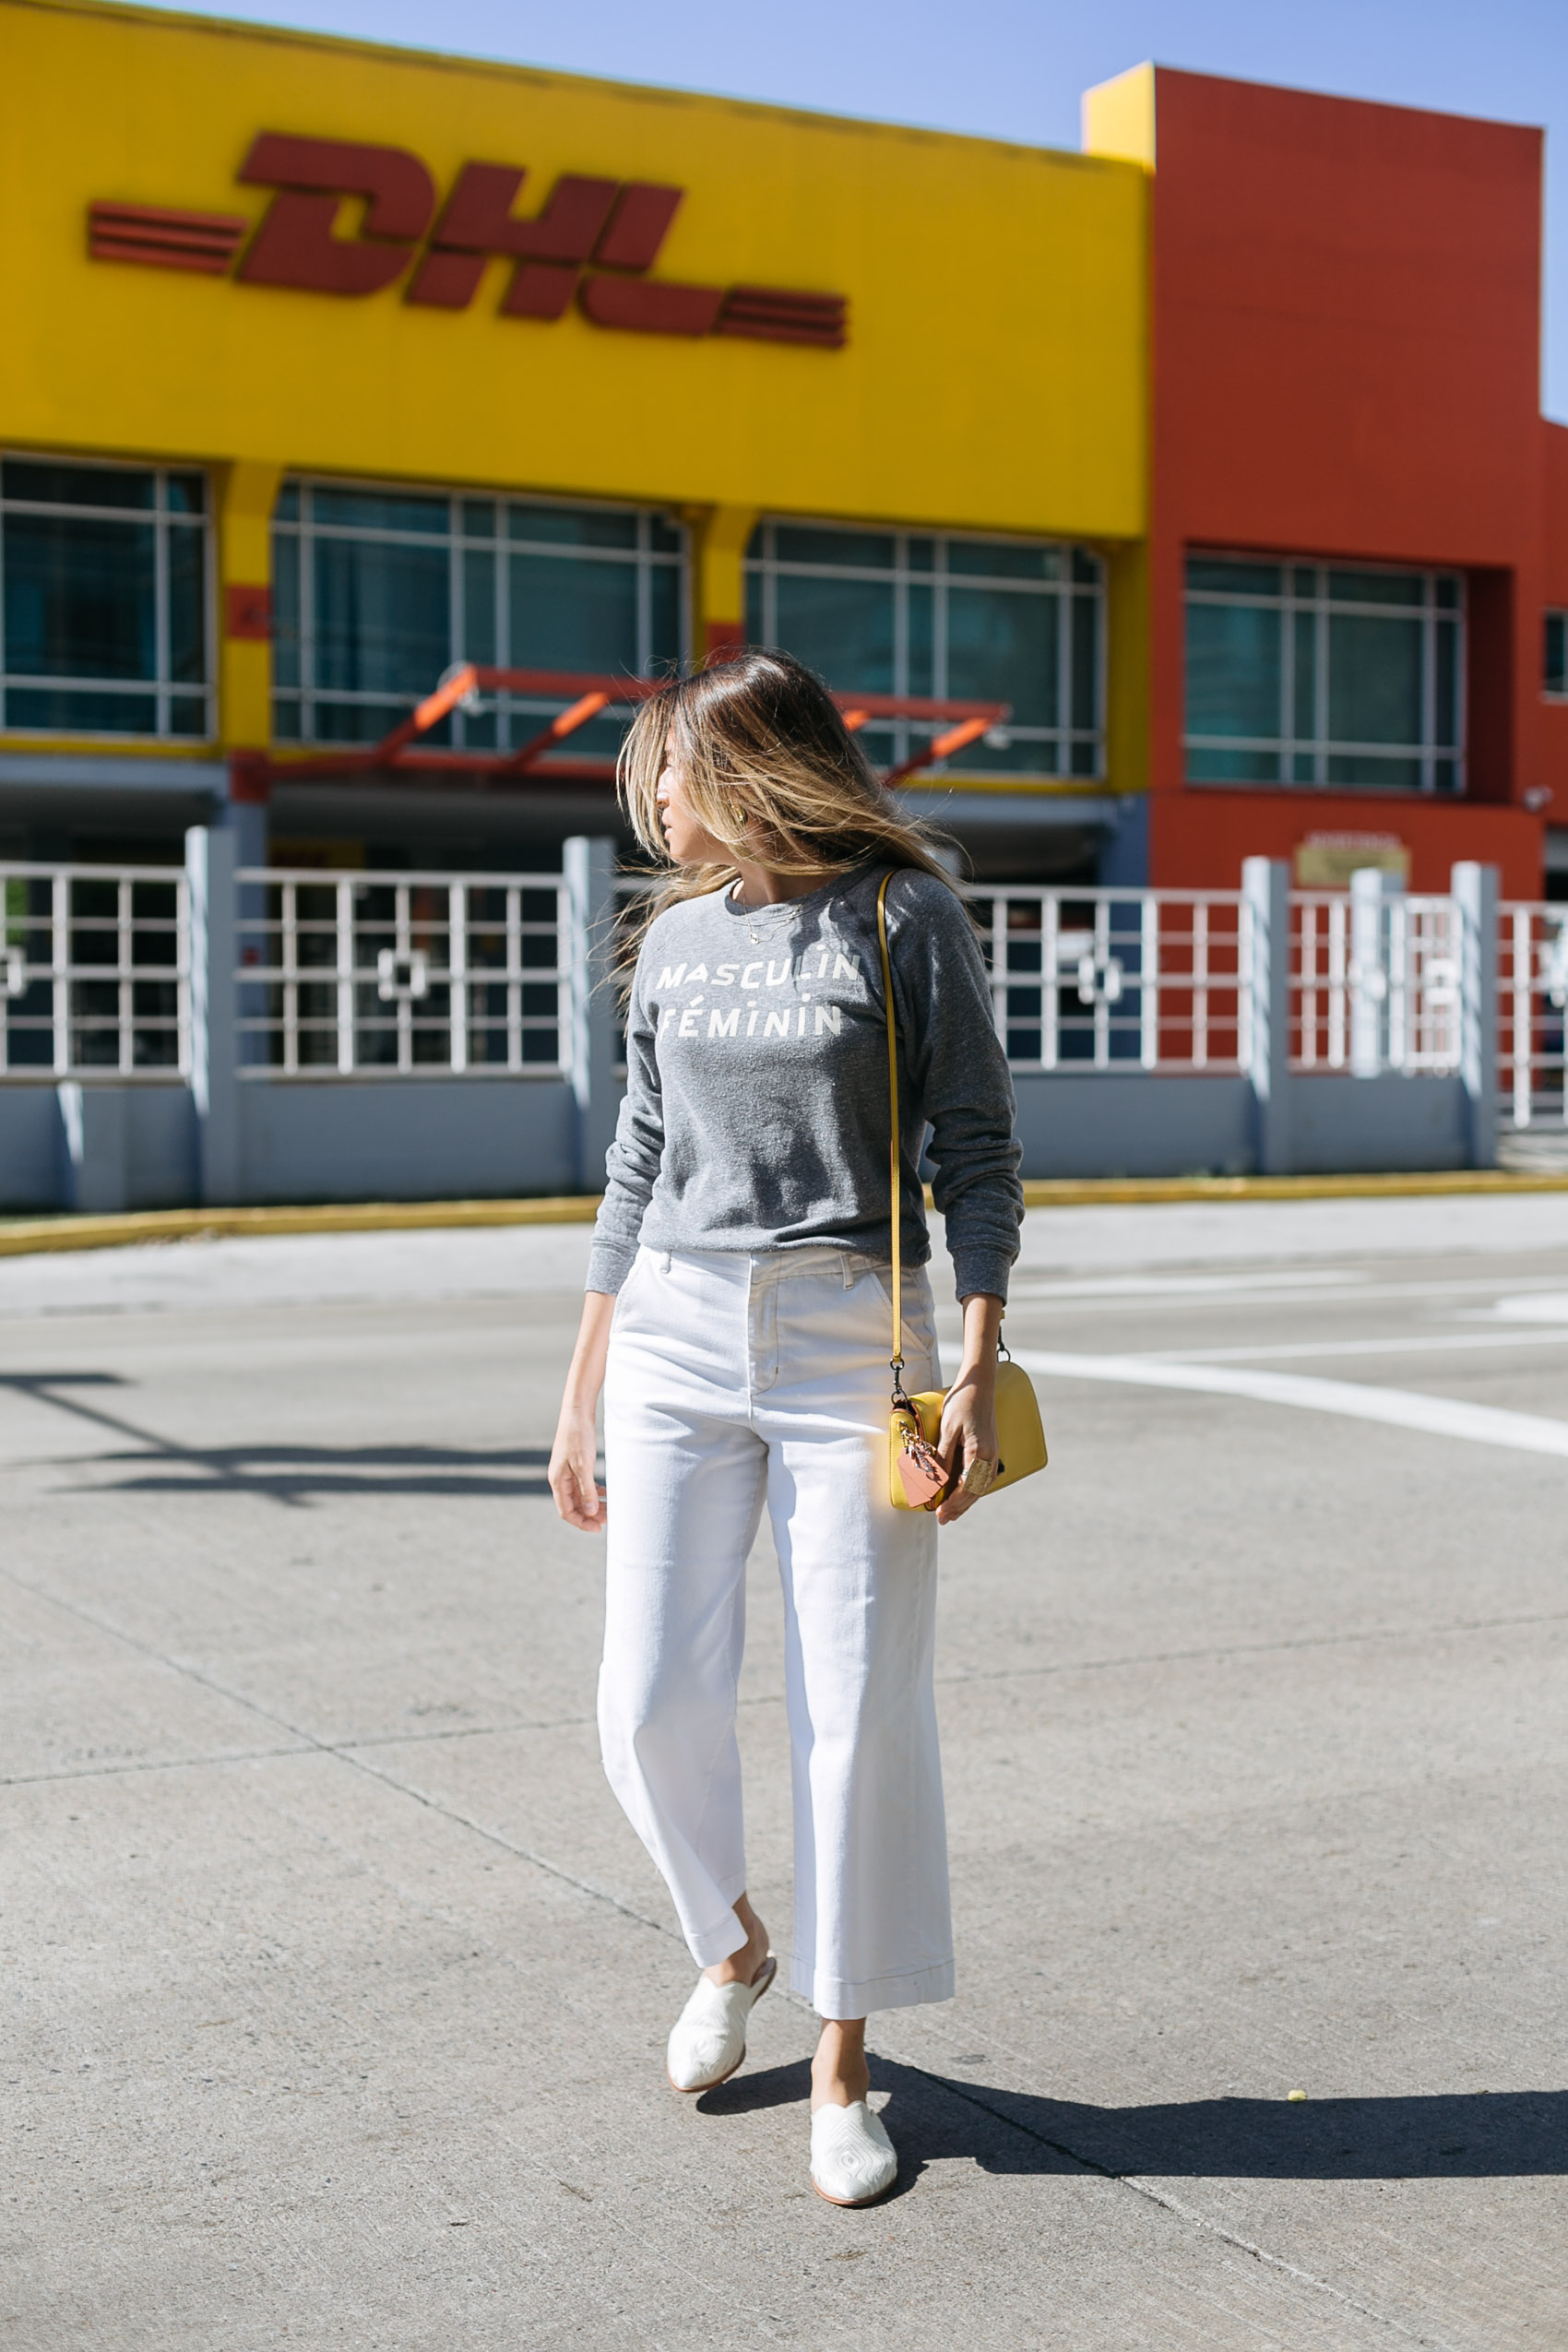 Maristella wearing a Clare V sweatshirt with white denim and mules